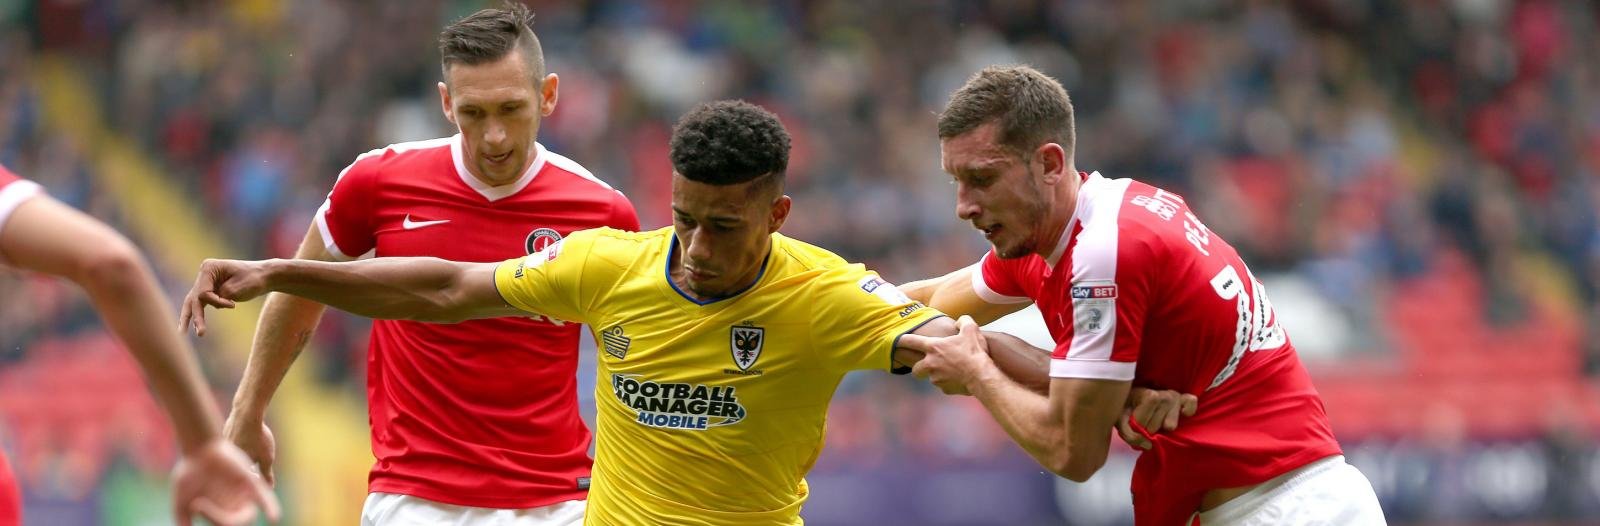 League One Round-Up: Scunthorpe the new leaders as Walsall ruin Bolton’s unbeaten start